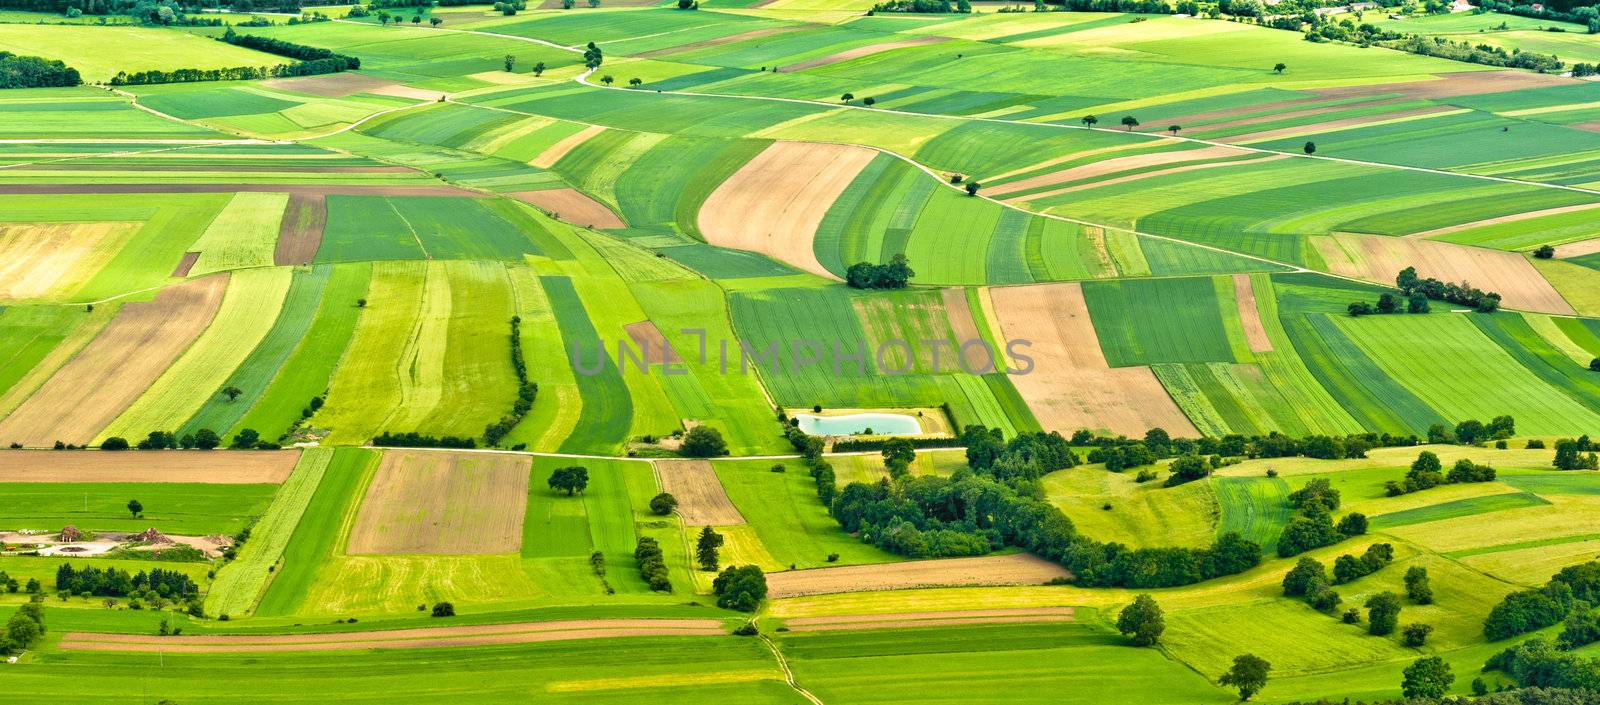 aerial view of green fields and slopes